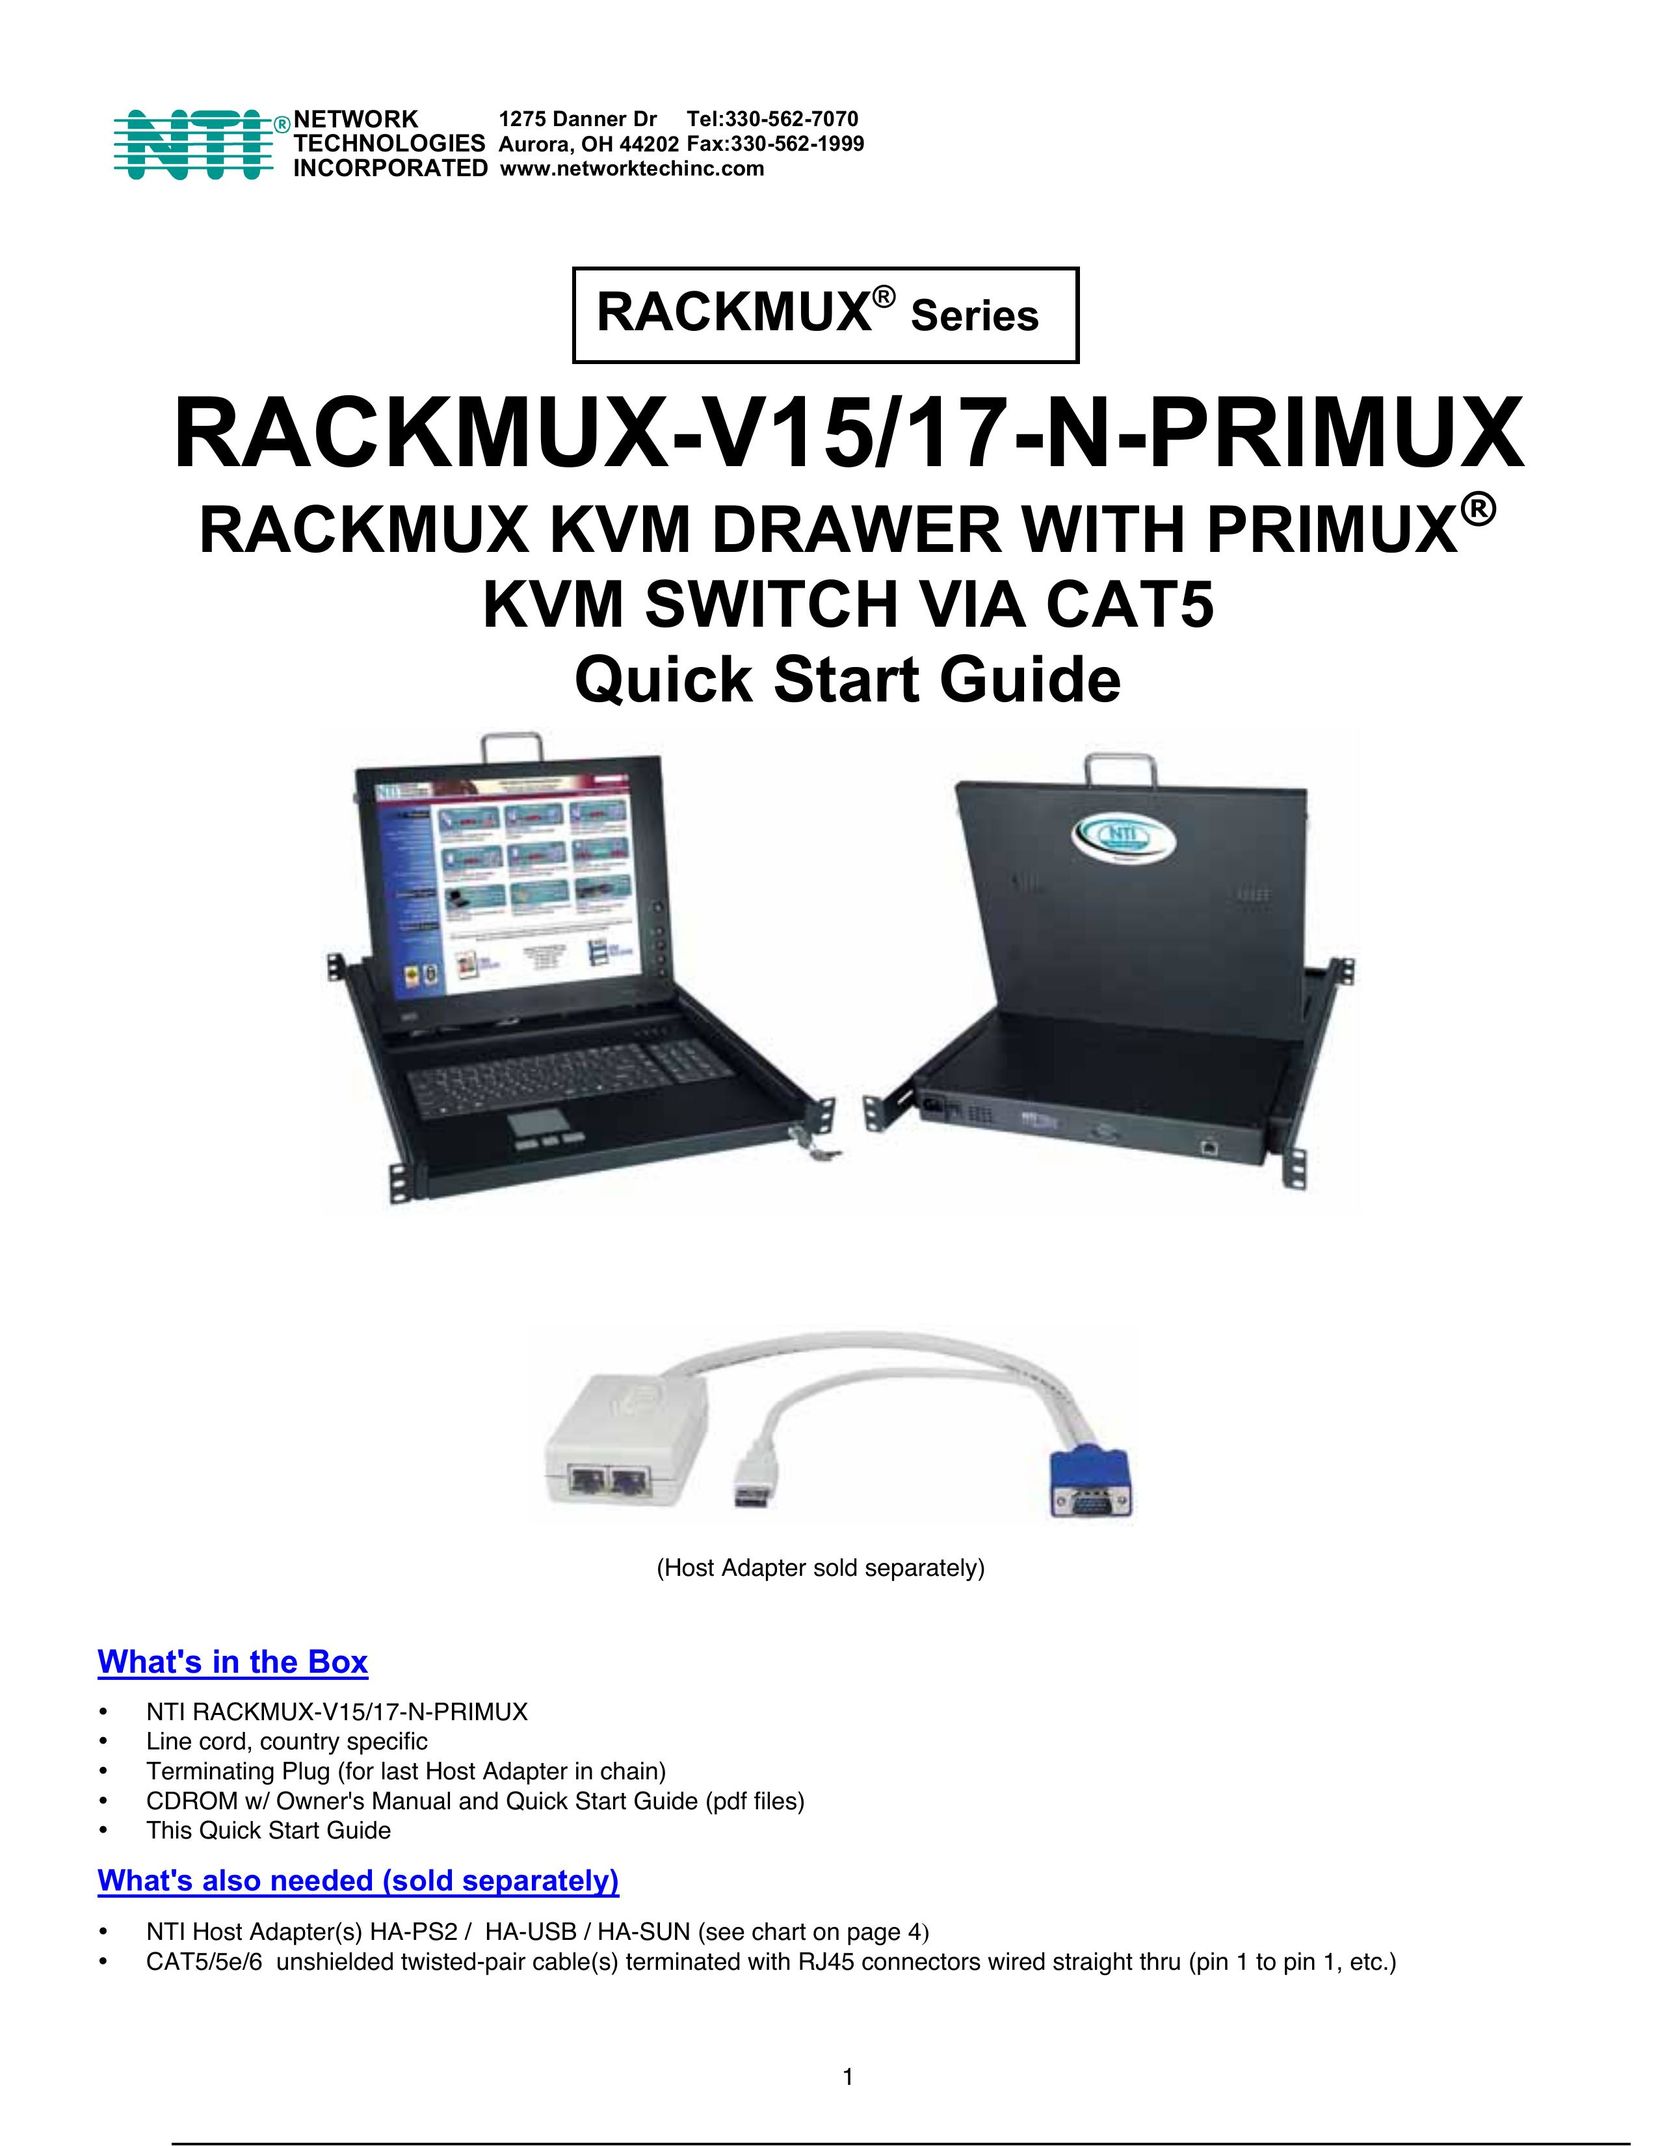 Network Technologies 17-N-PRIMUX Switch User Manual